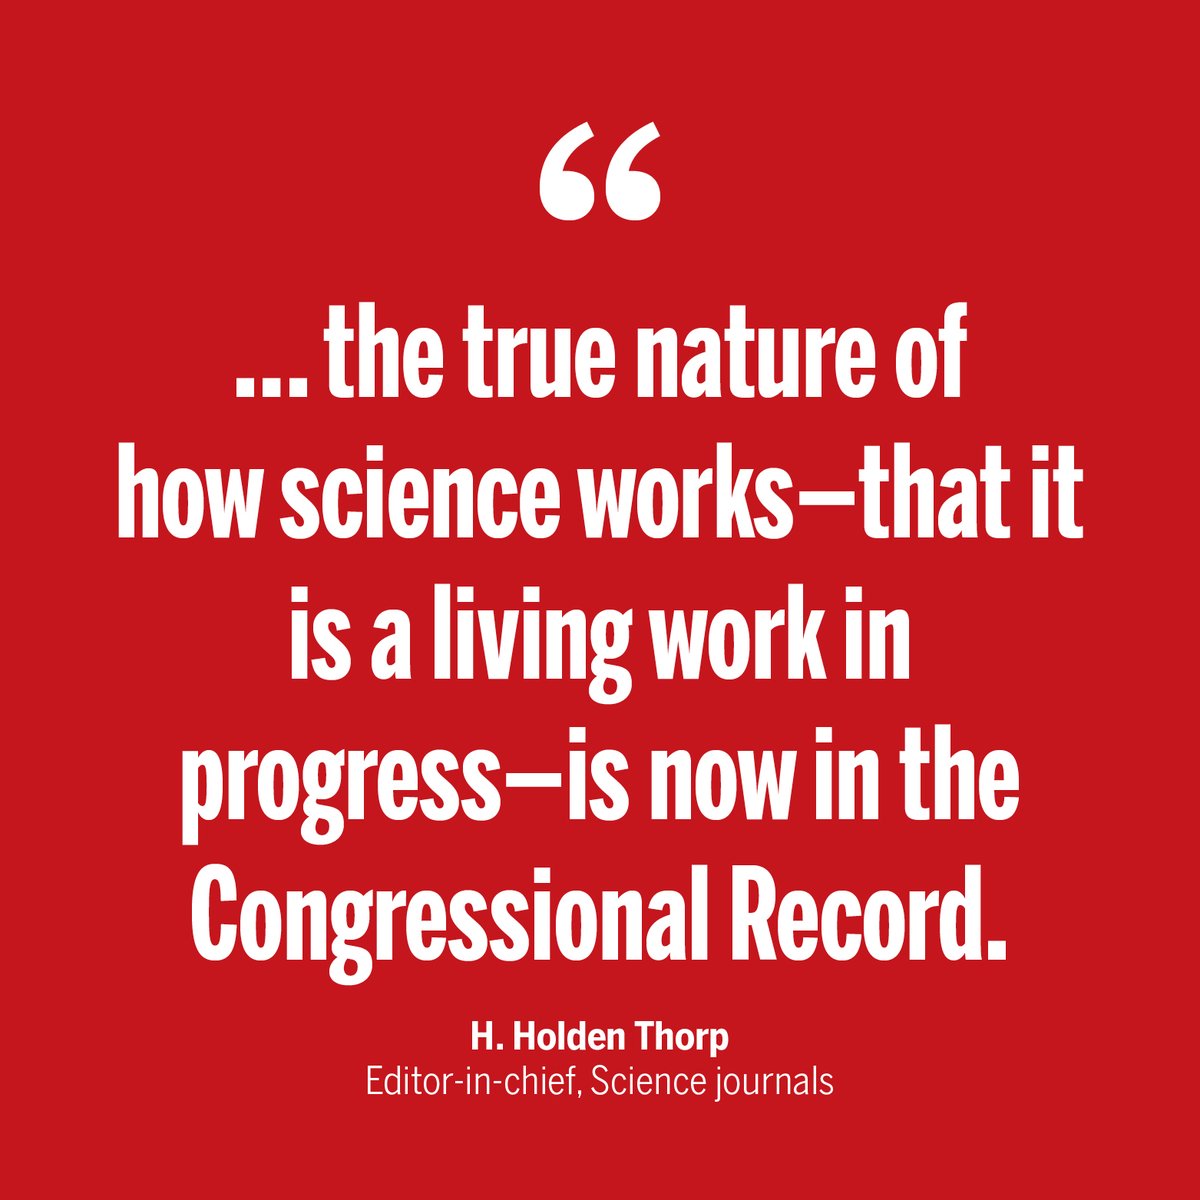 '… the true nature of how science works … is now in the Congressional Record.' 

In a new #ScienceEditorial, Editor-in-Chief H. Holden Thorp recounts his recent congressional testimony before the Select Subcommittee on the Coronavirus Pandemic. scim.ag/6Yr